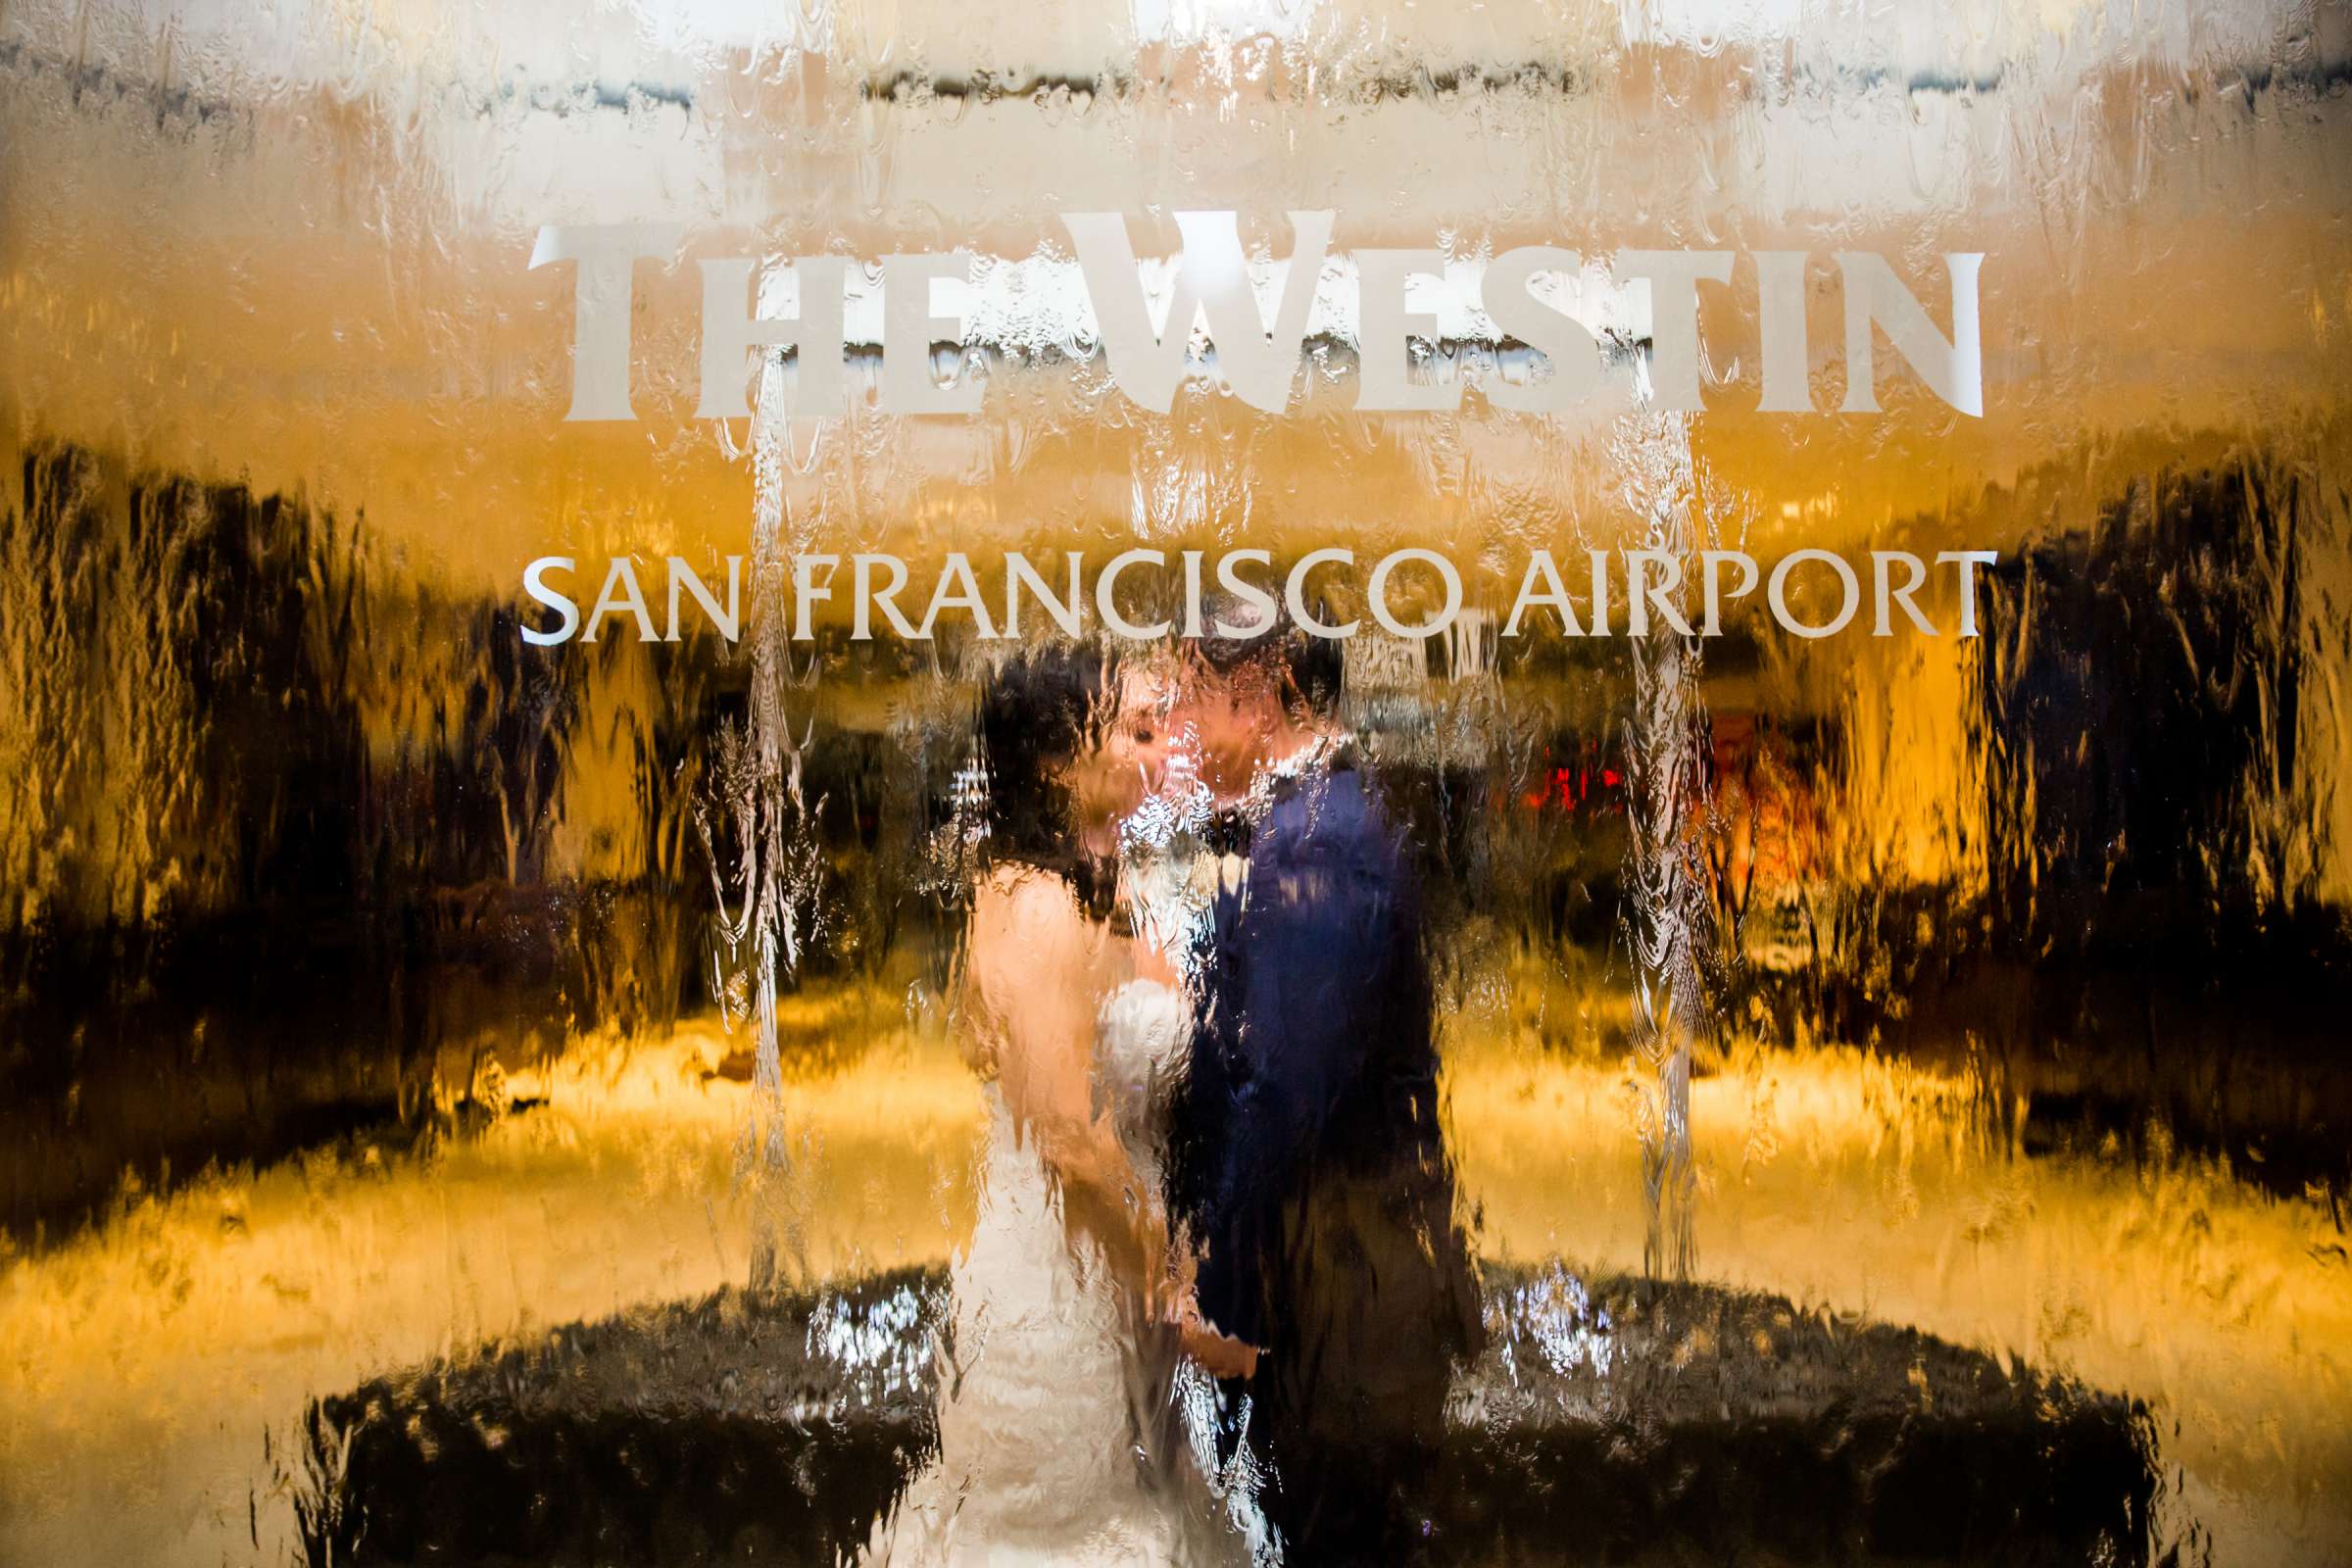 Bride and Groom, Artsy moment at The Westin San Francisco Airport Wedding coordinated by Dreams on a Dime Events & Weddings, Katrina and Christopher Wedding Photo #3 by True Photography